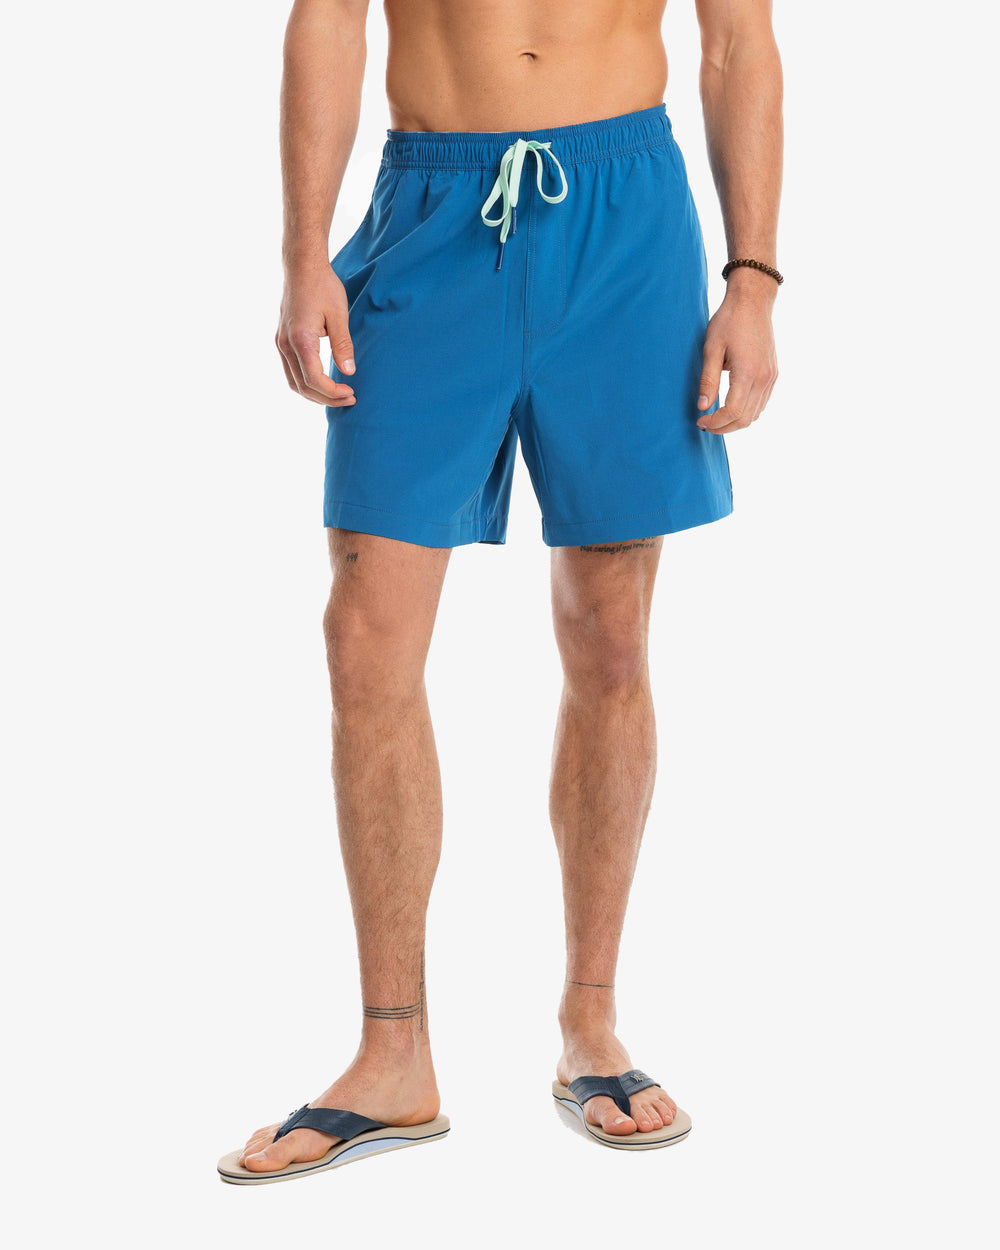 The model front view of the Men's Solid Swim Trunk by Southern Tide - Blue Sapphire